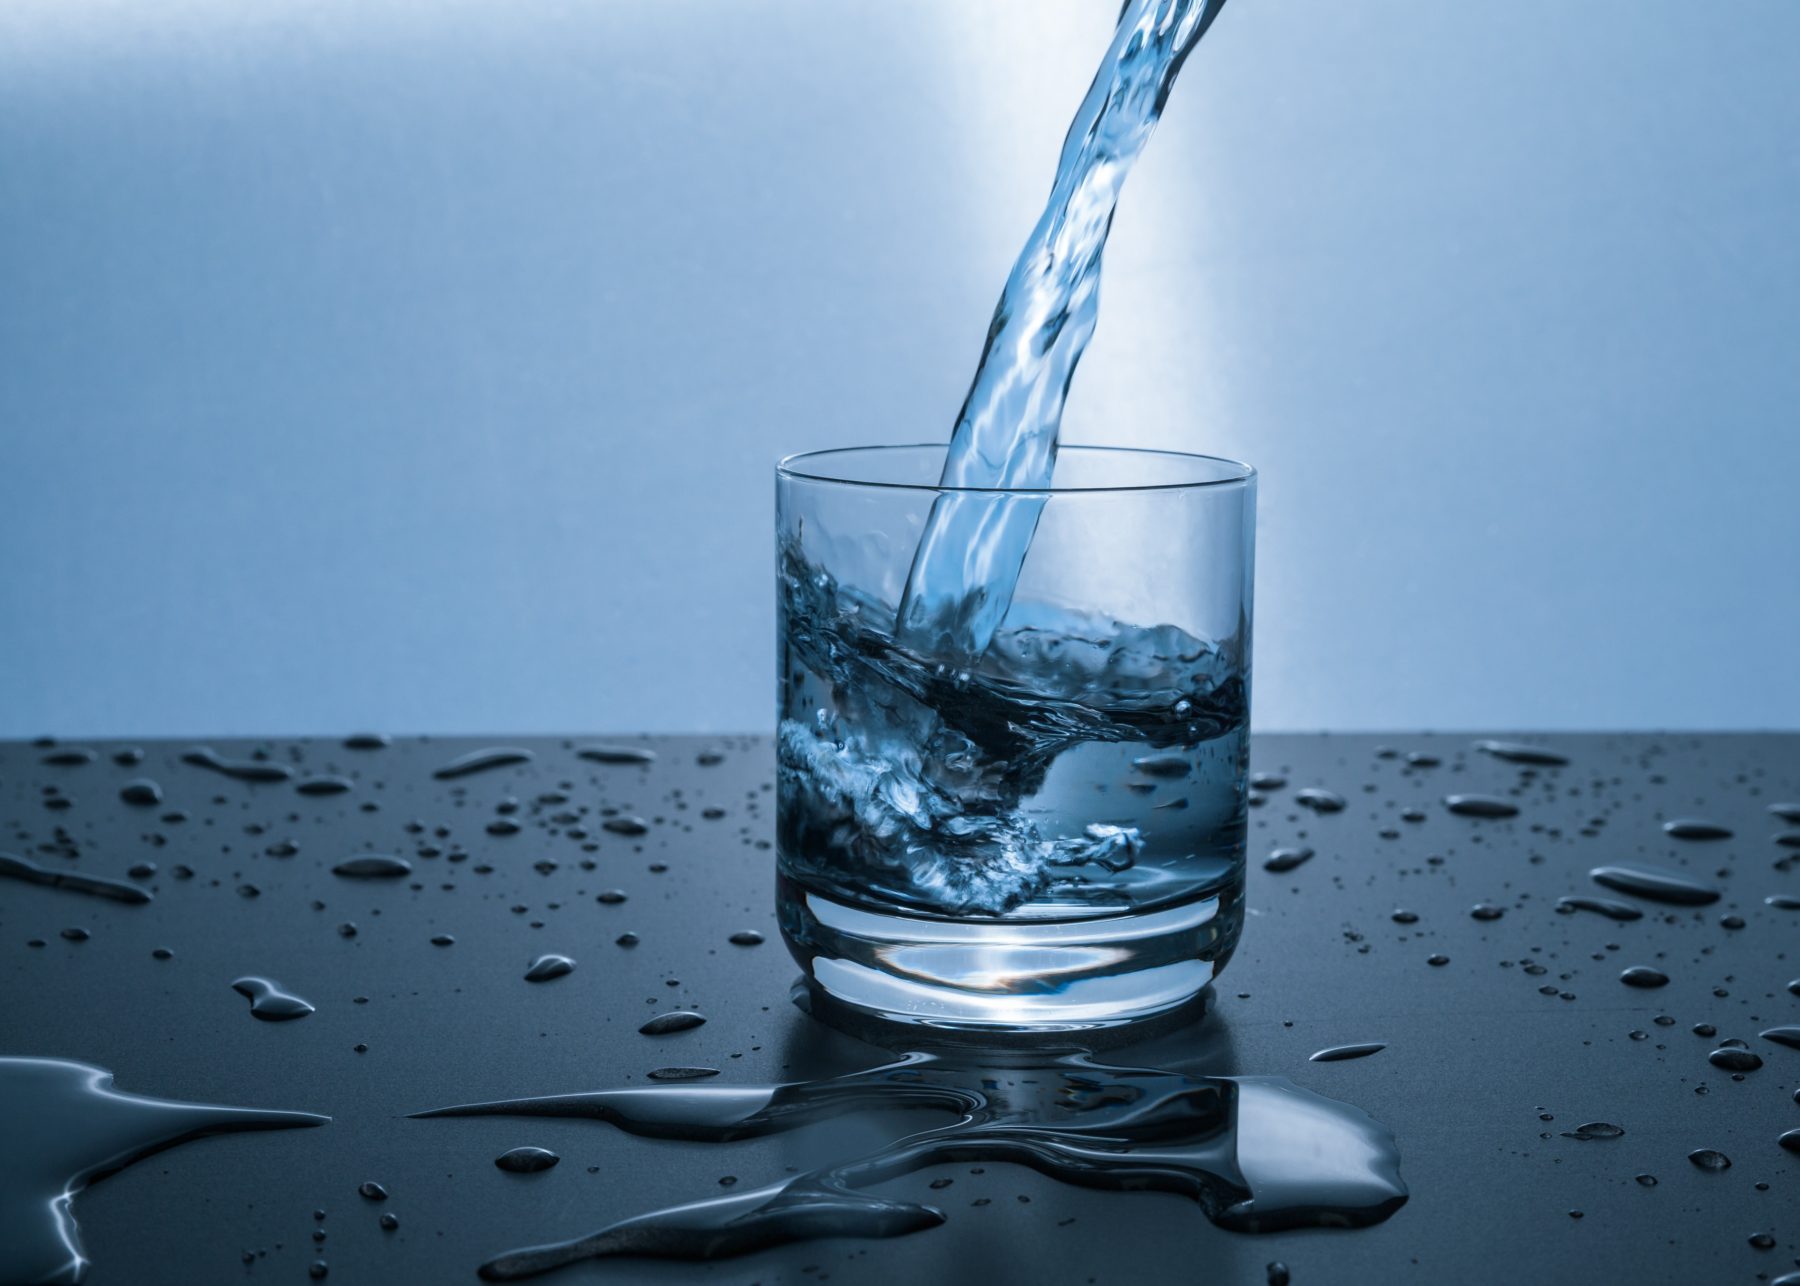 blue glass and water -triple win advisory sustainable business blog